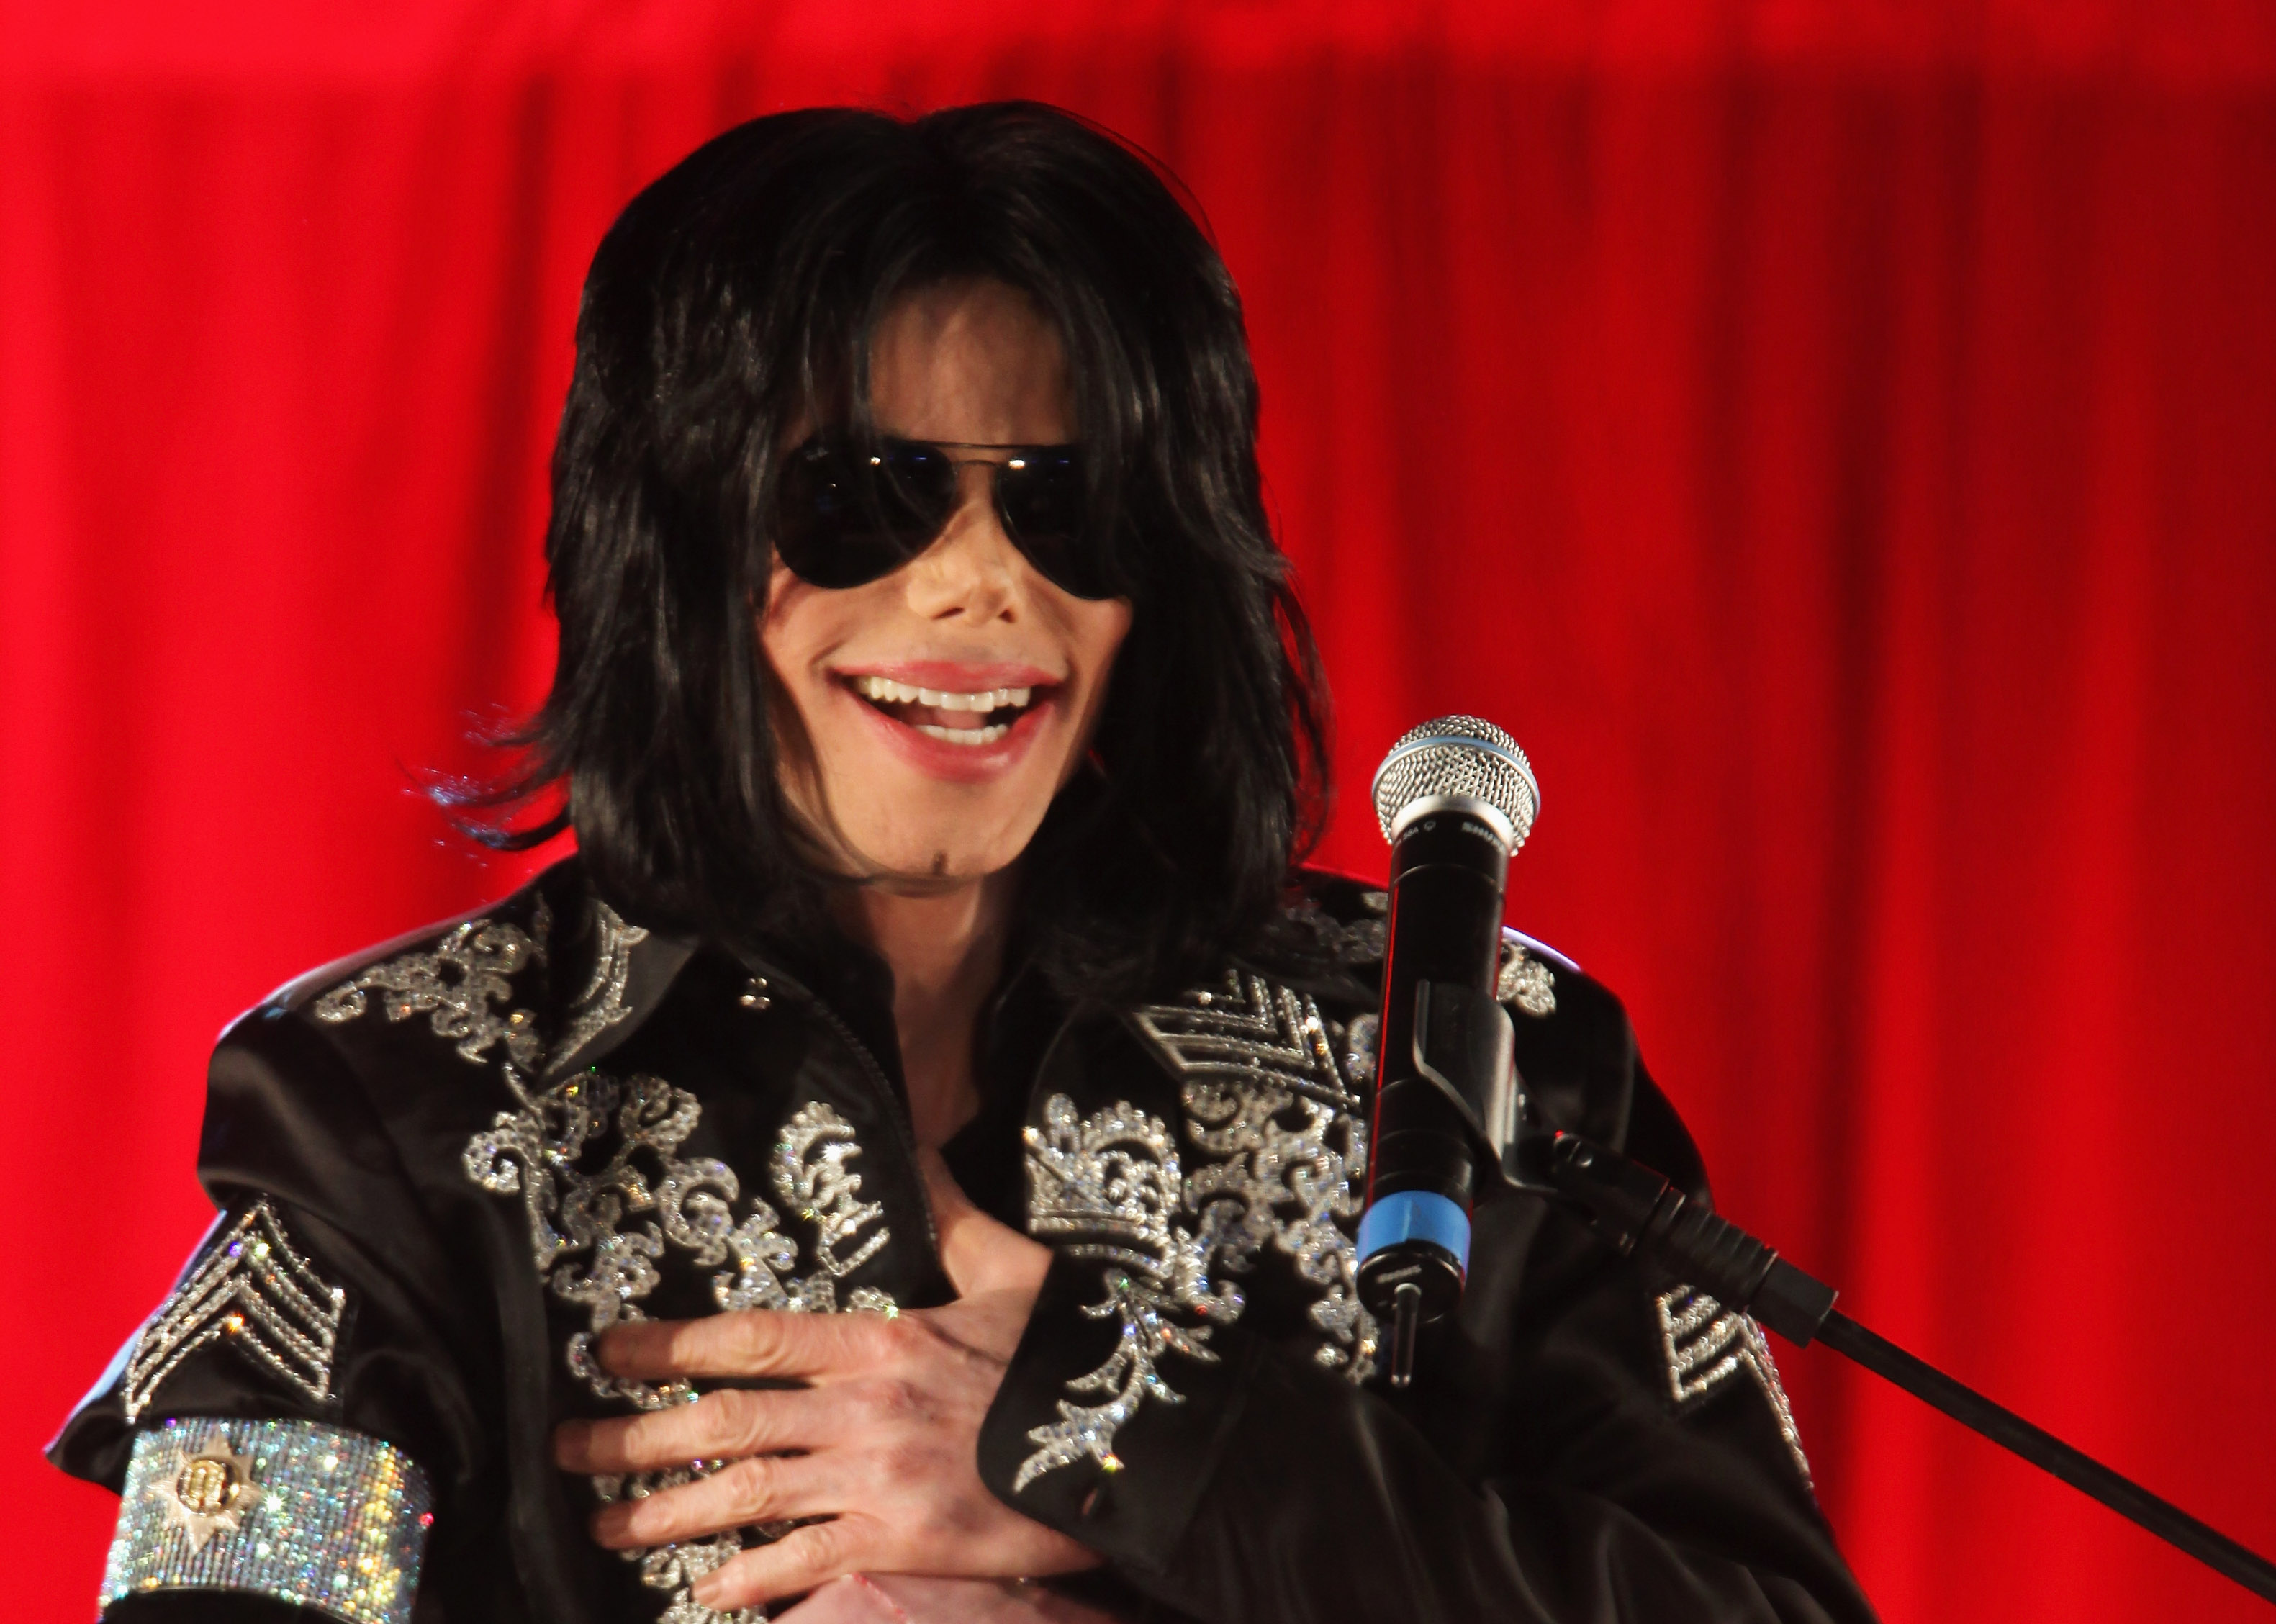 Michael Jackson announces plans for Summer residency at the O2 Arena